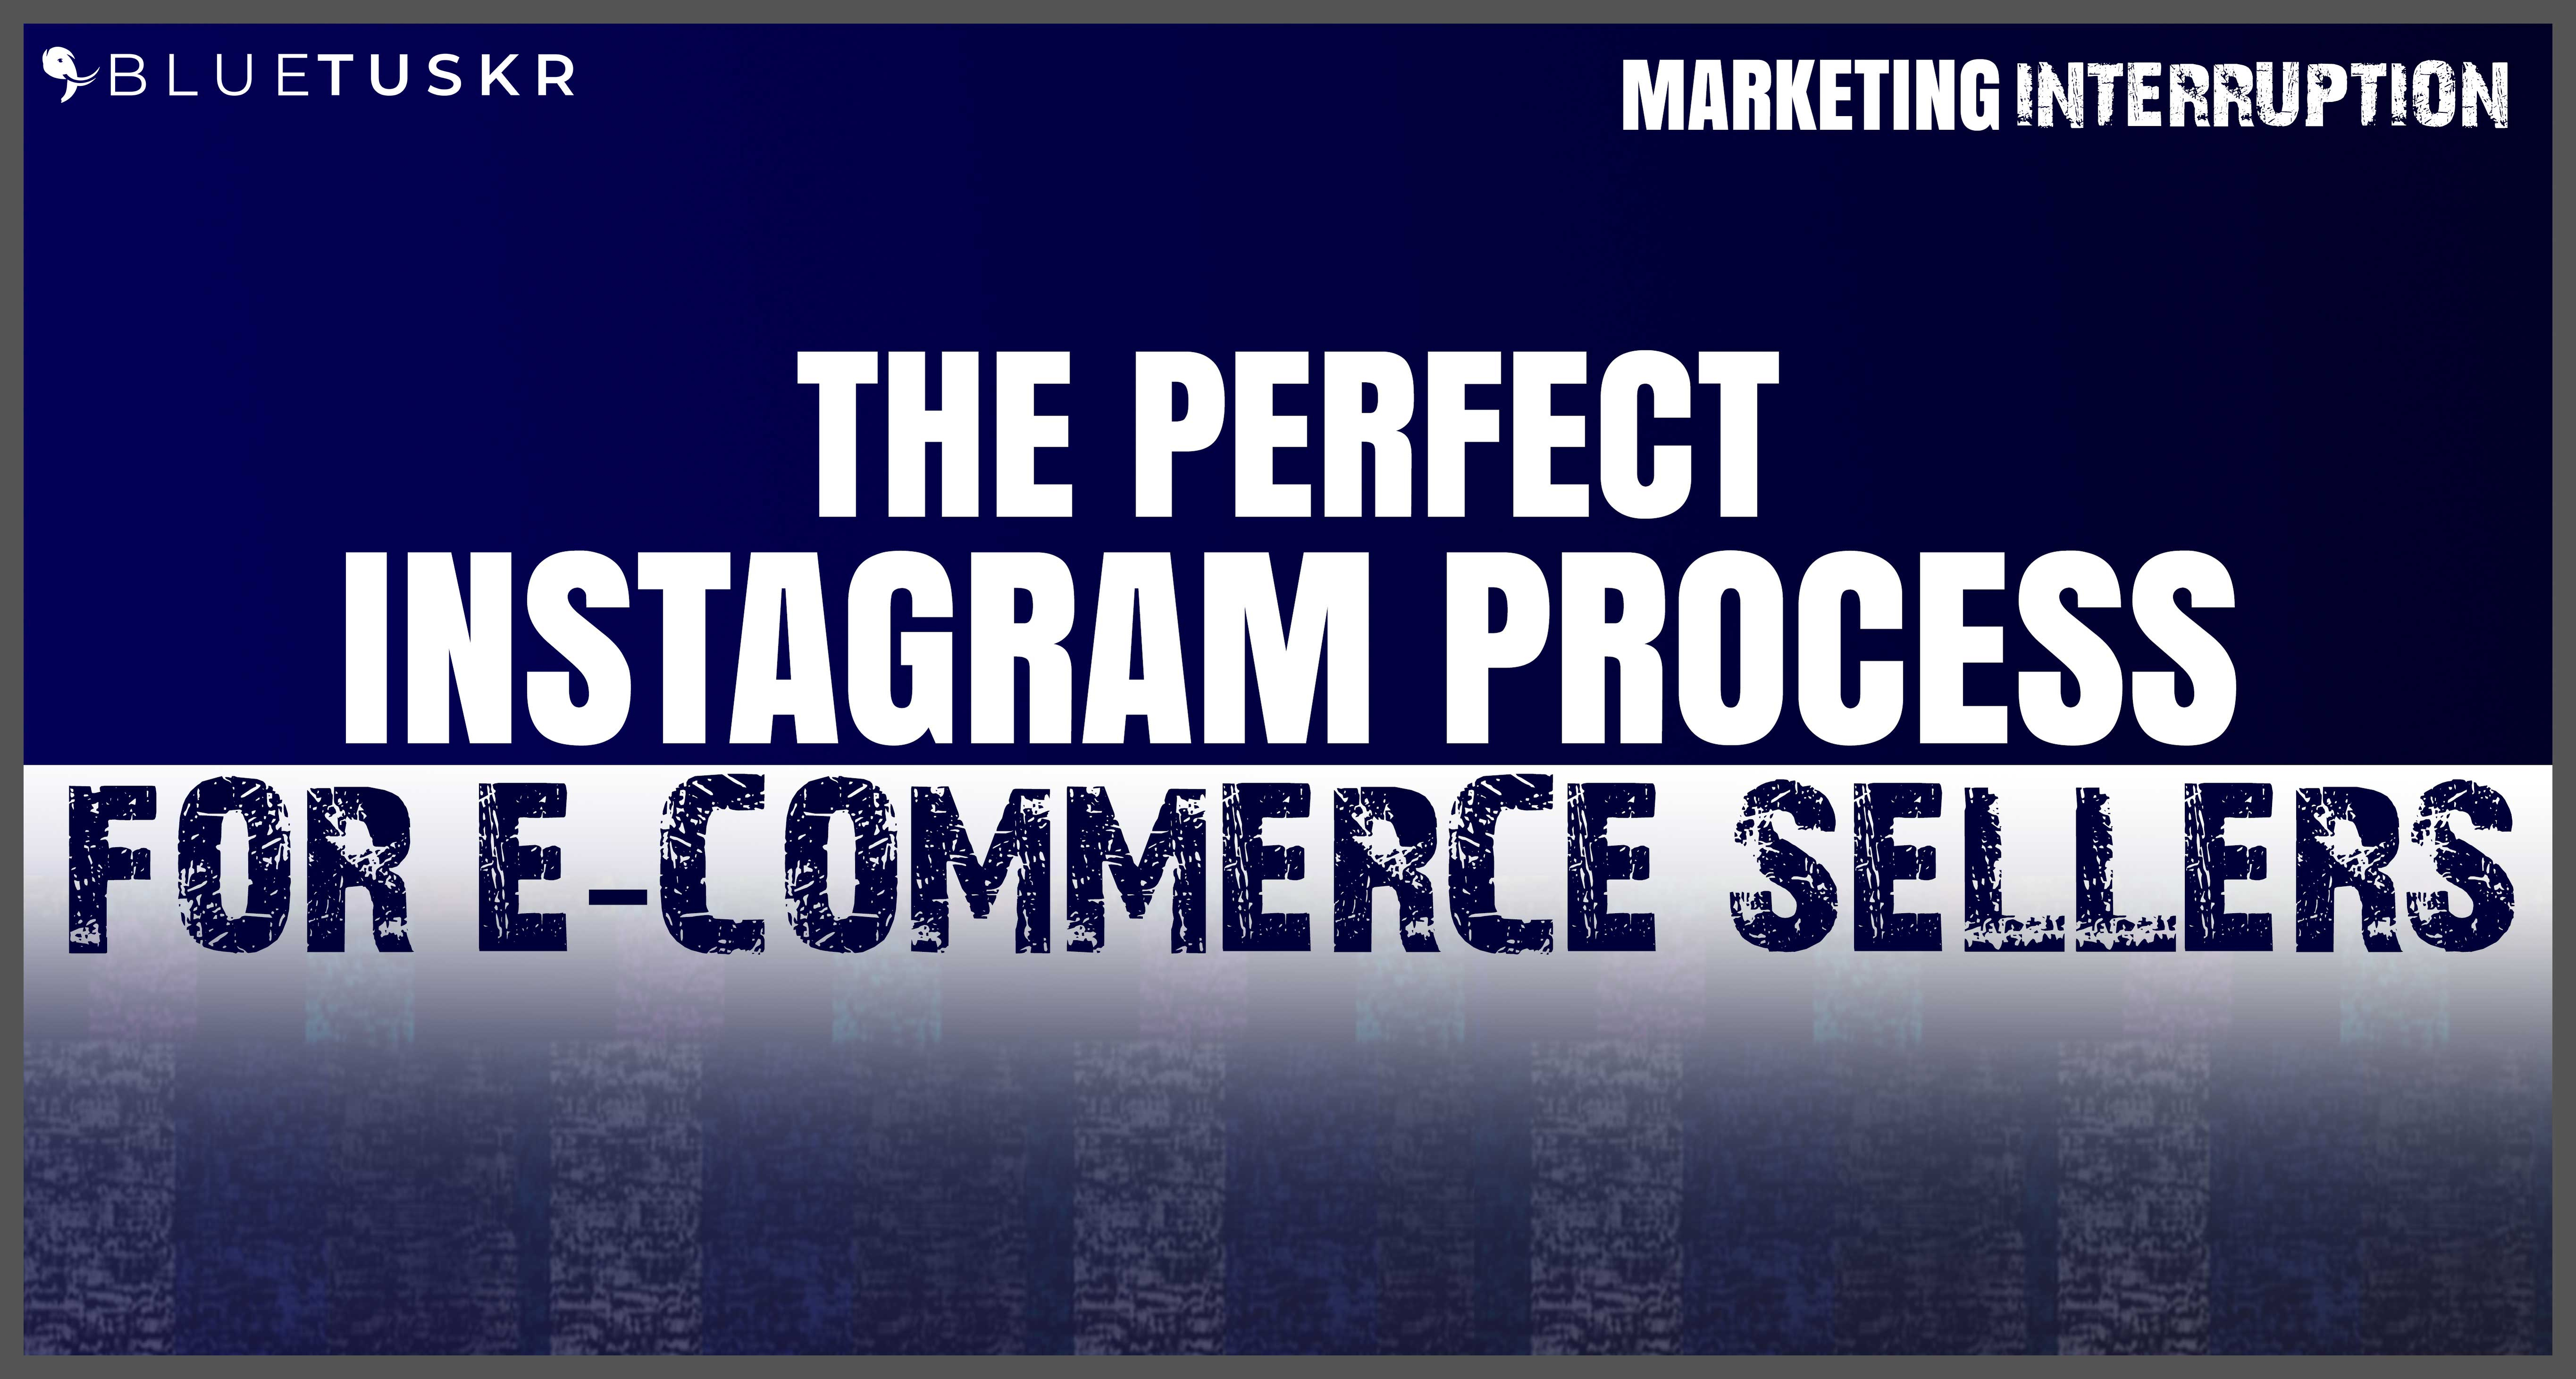 The Perfect Instagram Process for E-commerce Sellers